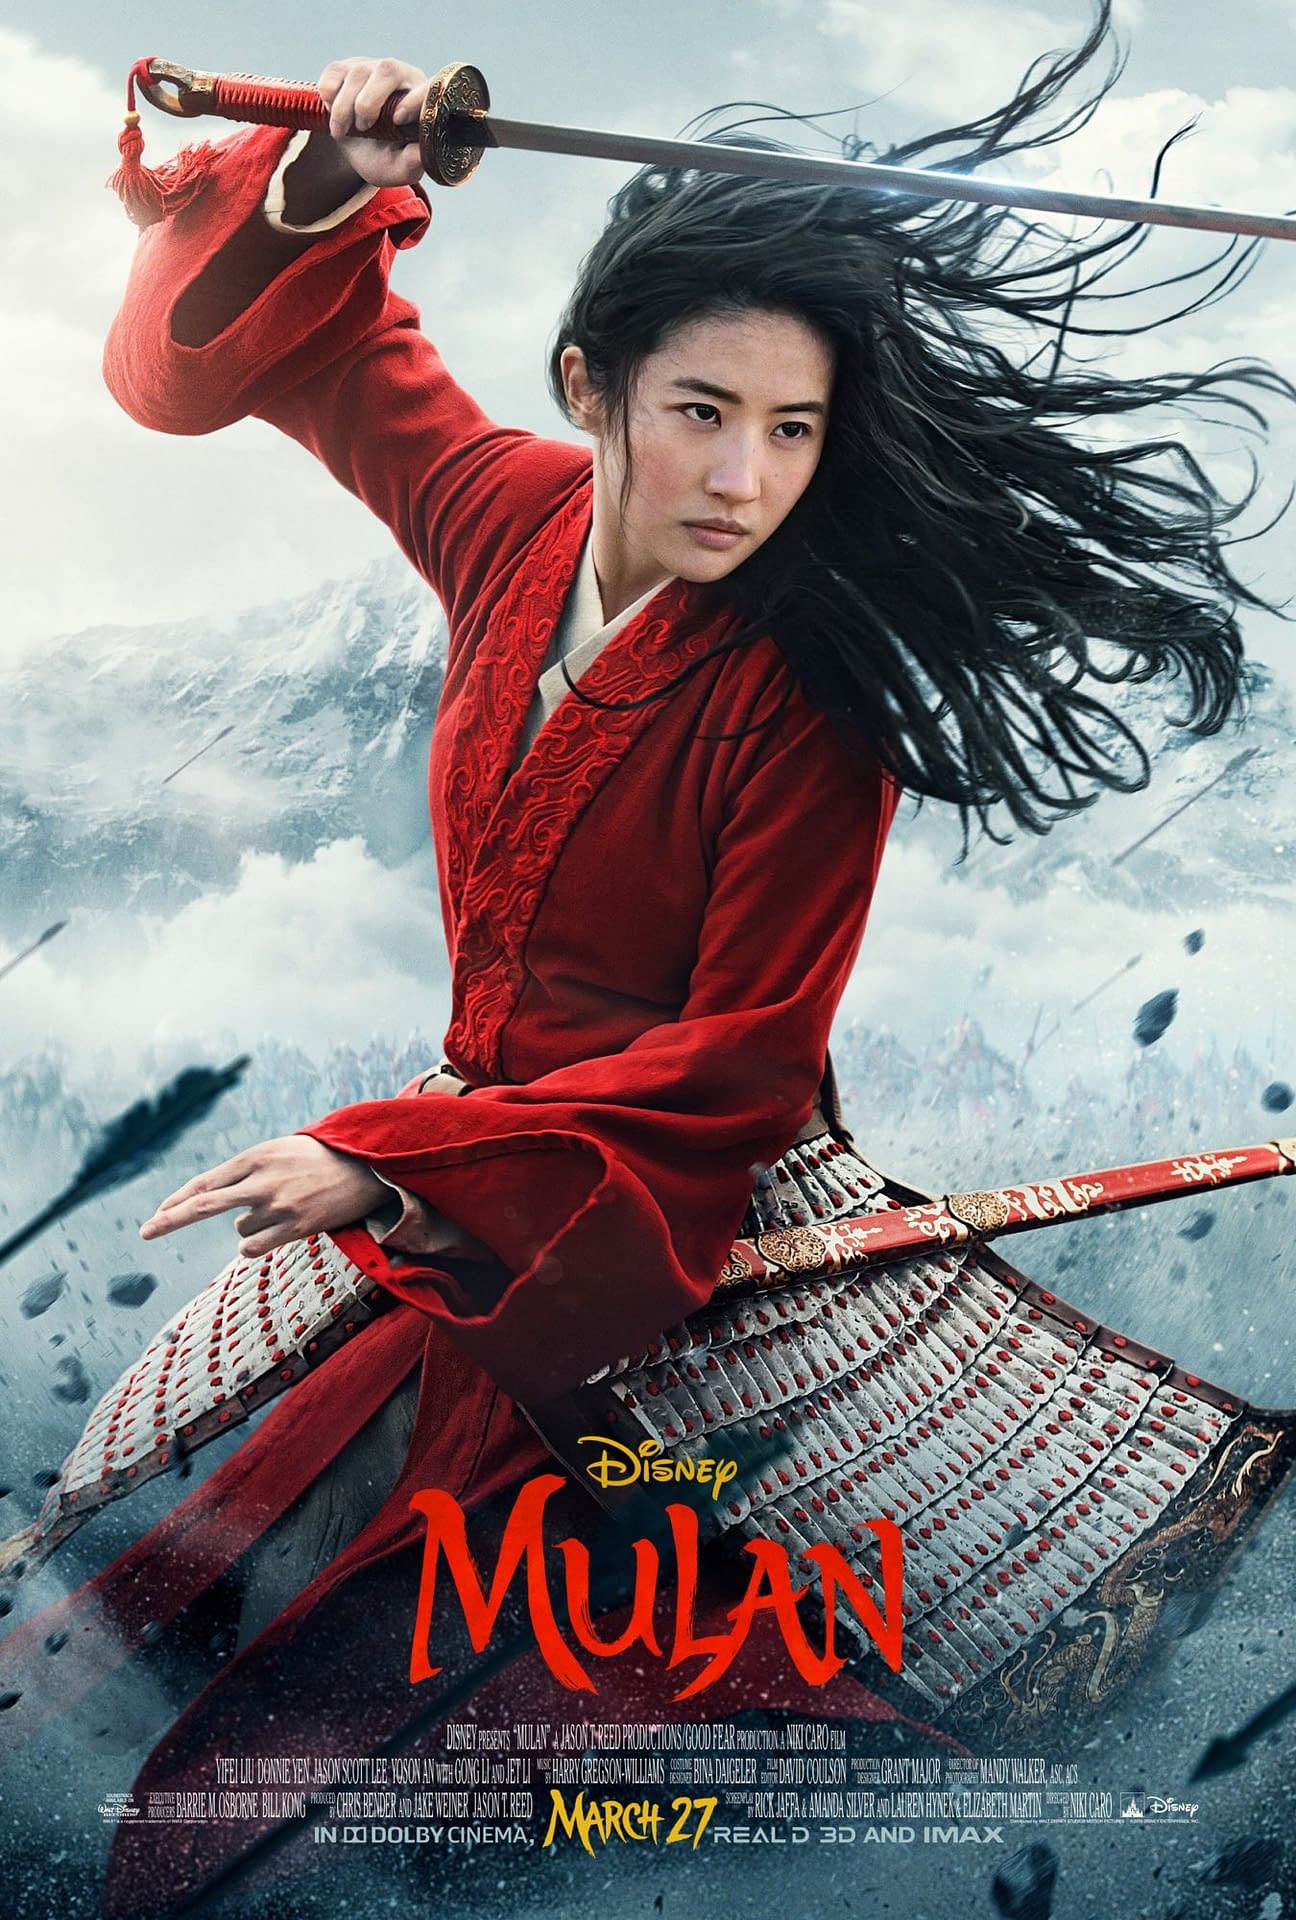 New Poster for "Mulan" Ahead of a New Trailer Dropping Tomorrow